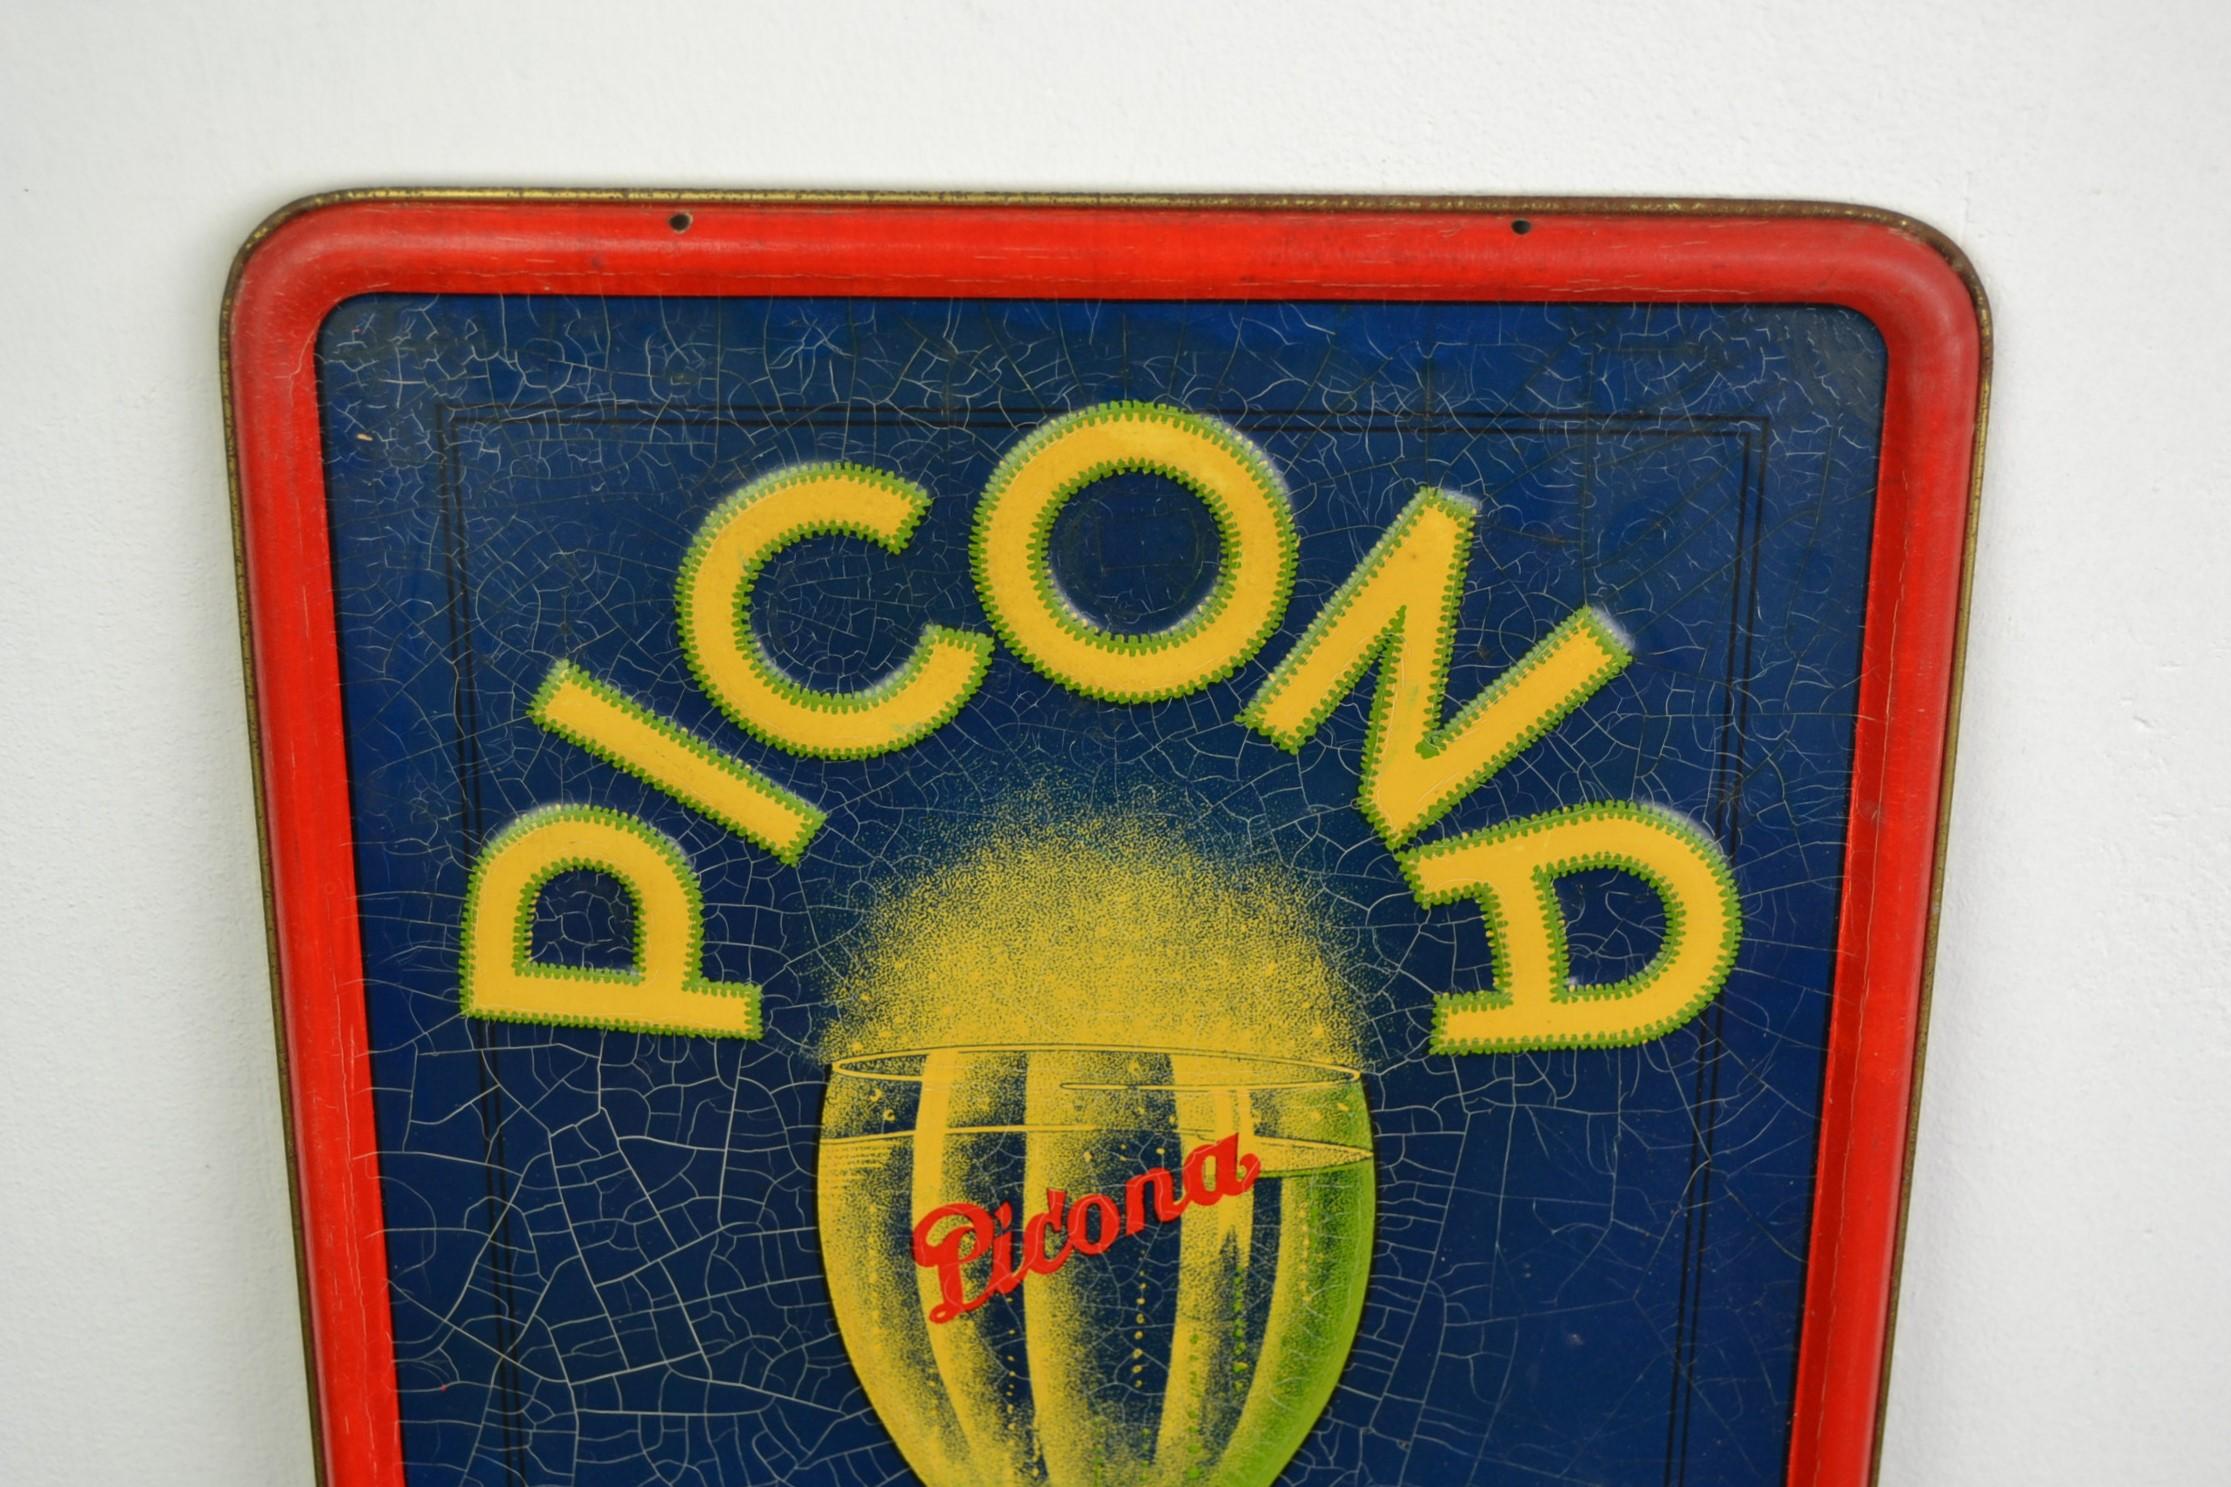 Vintage tin sign for lemonade from the 1930s. 
It's a blue sign with a sparkling glass of Picona lemonade. With red border and embossed yellow lettering. 
This sign for orange and limon lemonade is dated 1934 and made by Rob Otten, Belgium.
It